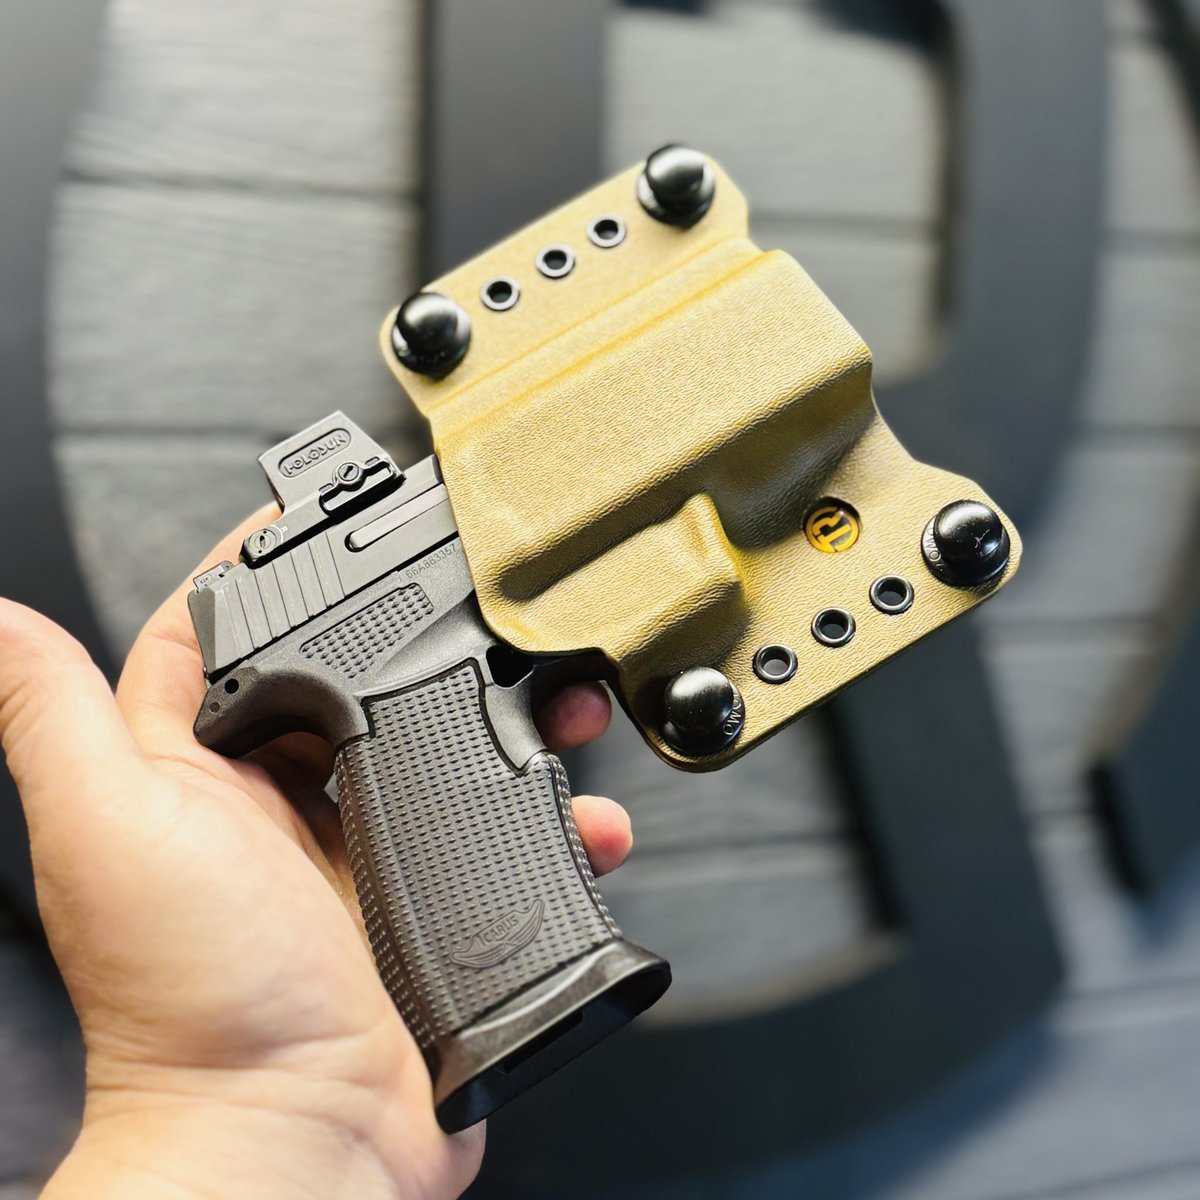 Just when you thought we were done with custom grips, here’s another one! Icarus’ new Air Frame on a P365 Macro. #flexyourguns #tacrig #icarusprecision #sigsauer #sigsauerp365 #p365 #sigp365 #newmodel #pewpew #concealedcarry @sigsauerinc @icarusprecision